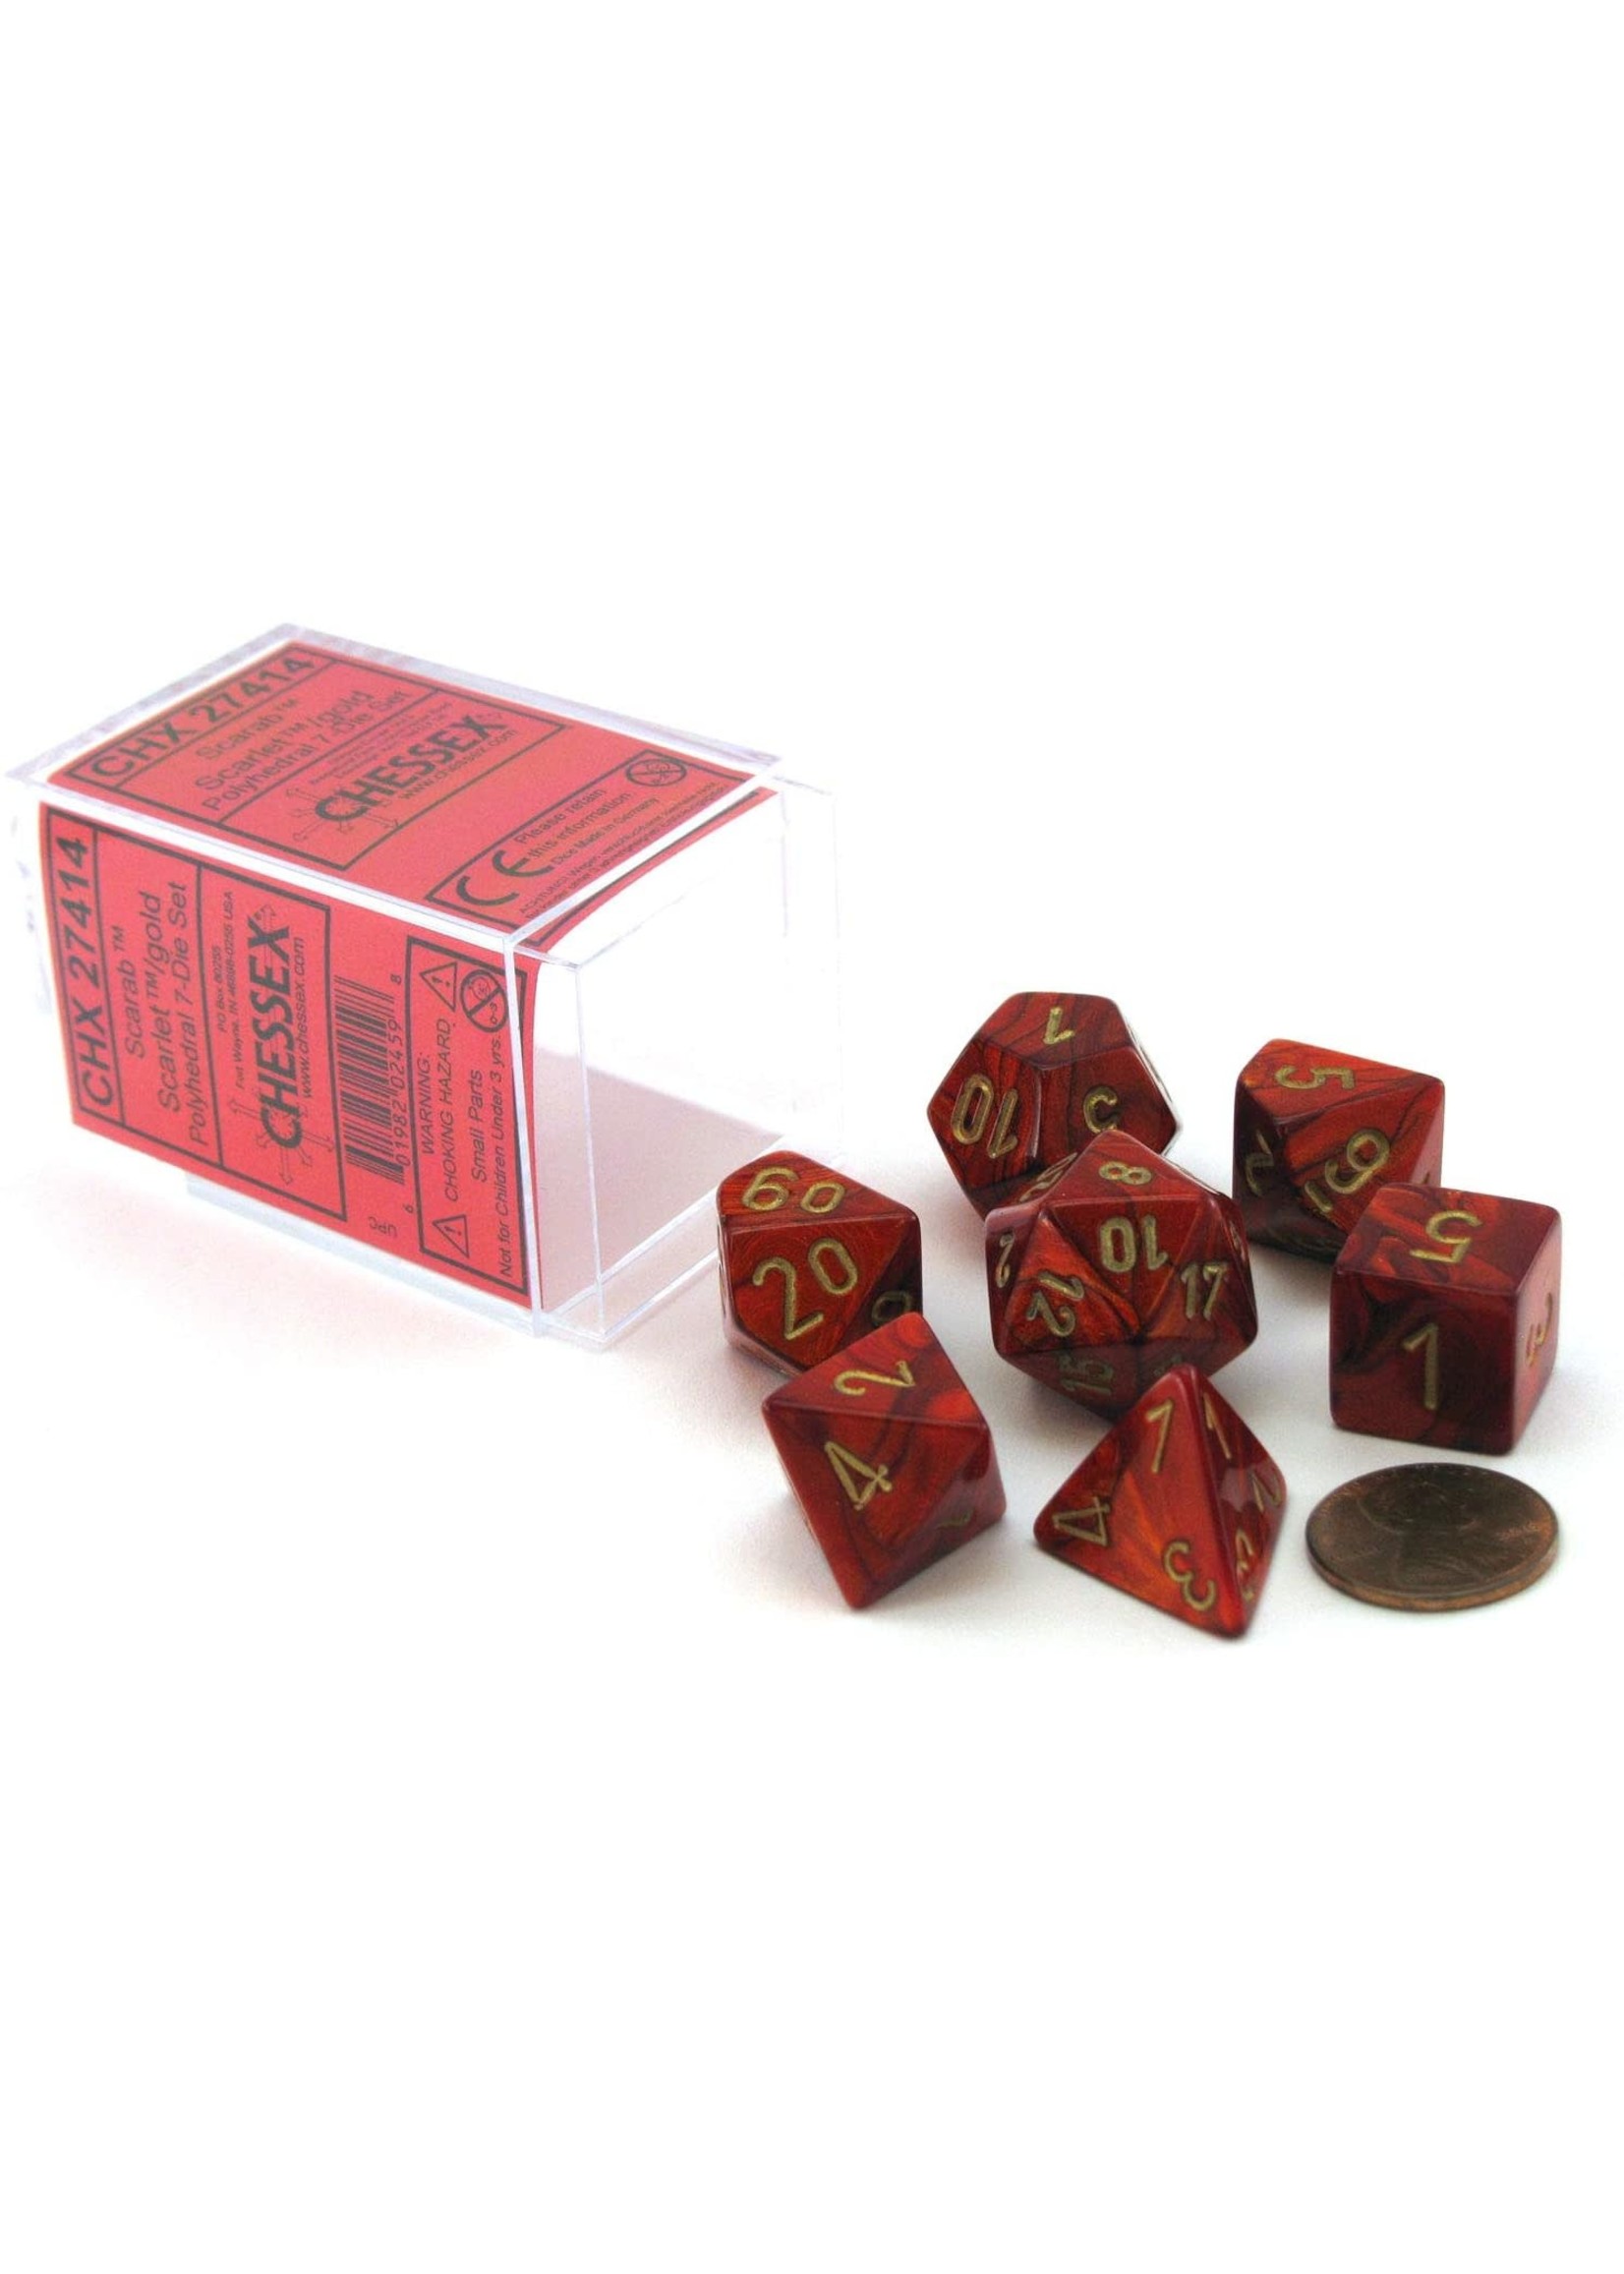 Chessex Scarab Poly 7 set: Scarlet w/ Gold